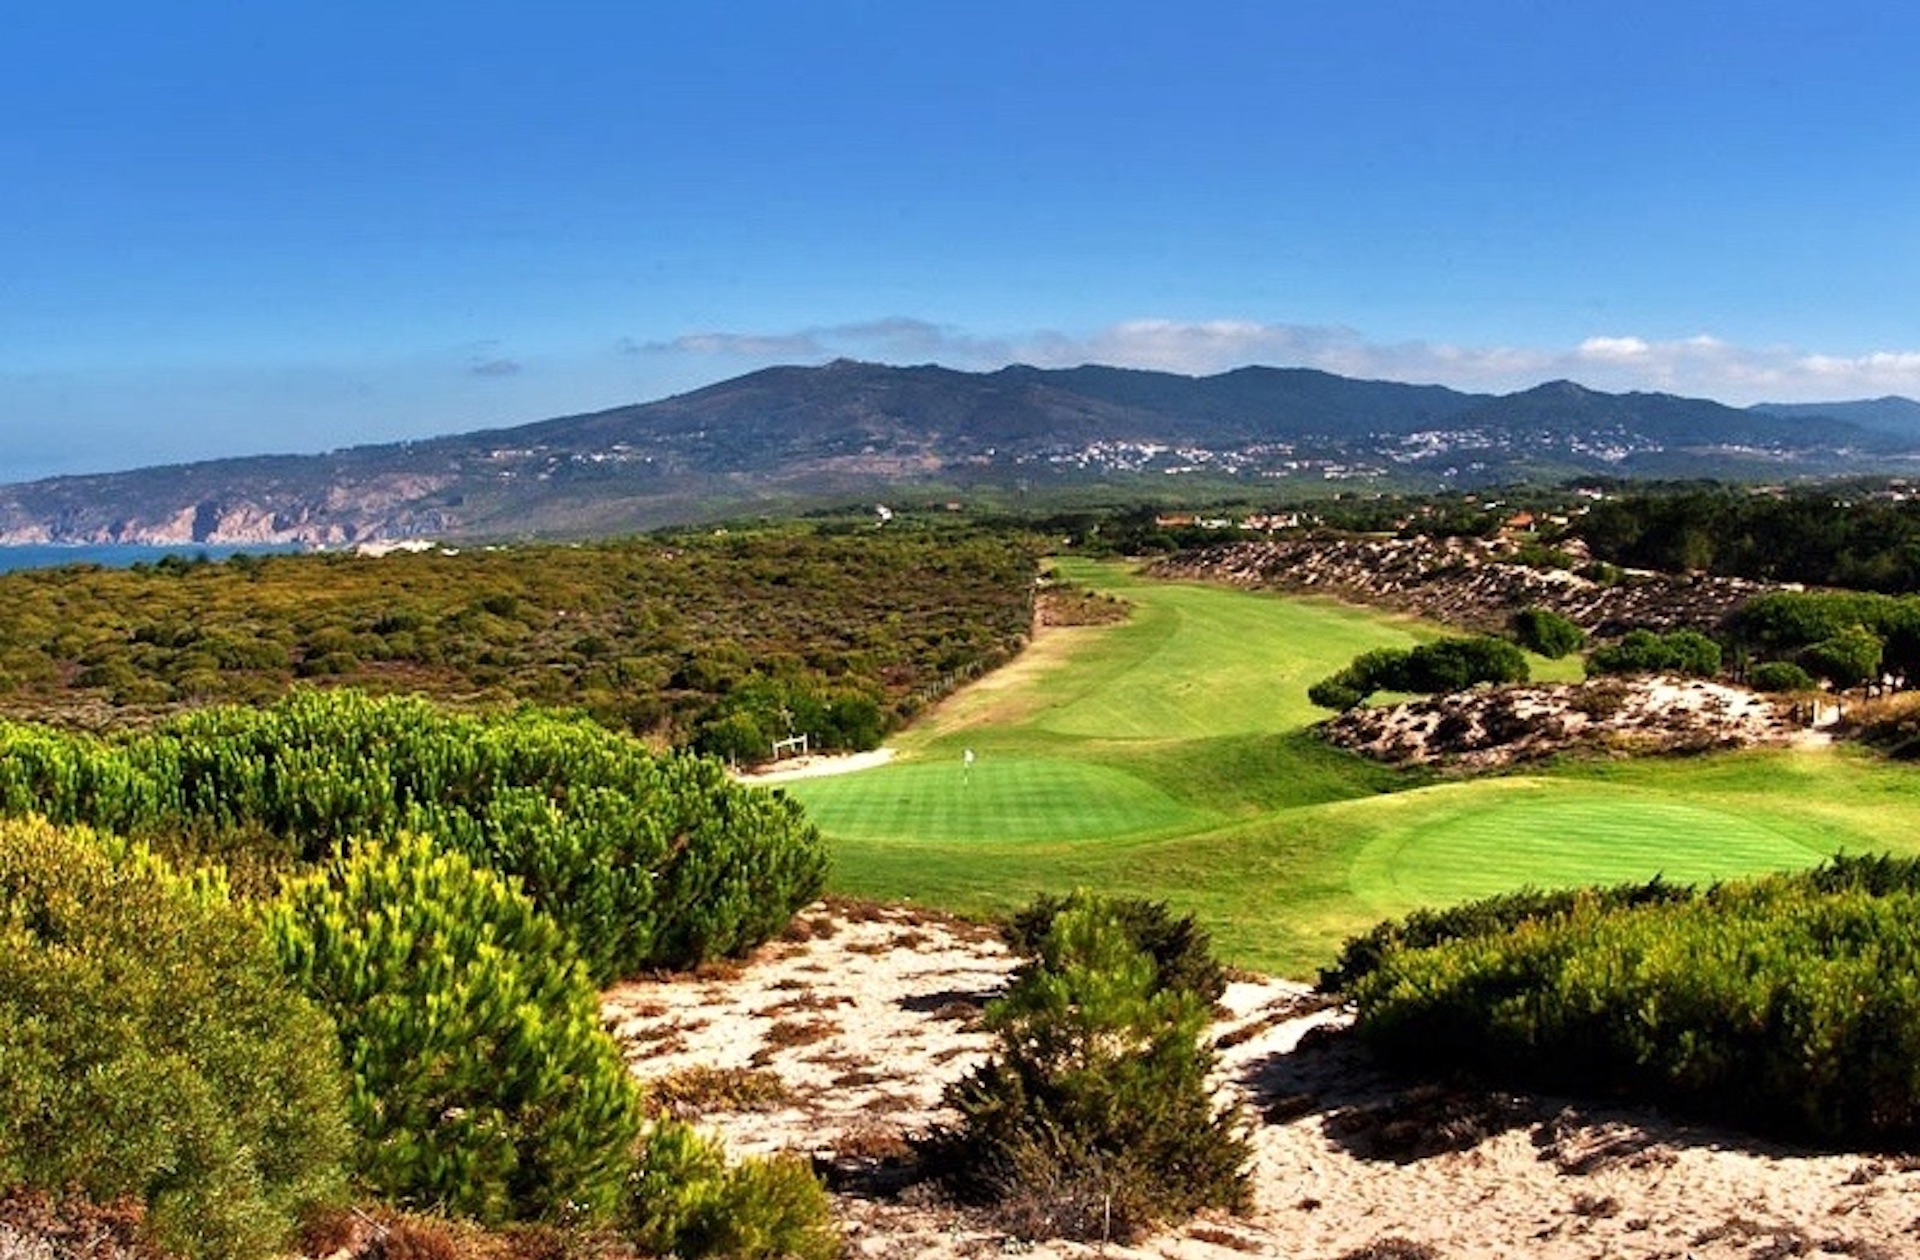 Mountains at Oitavos Dunes - Portugal's Nº1 Golf Course